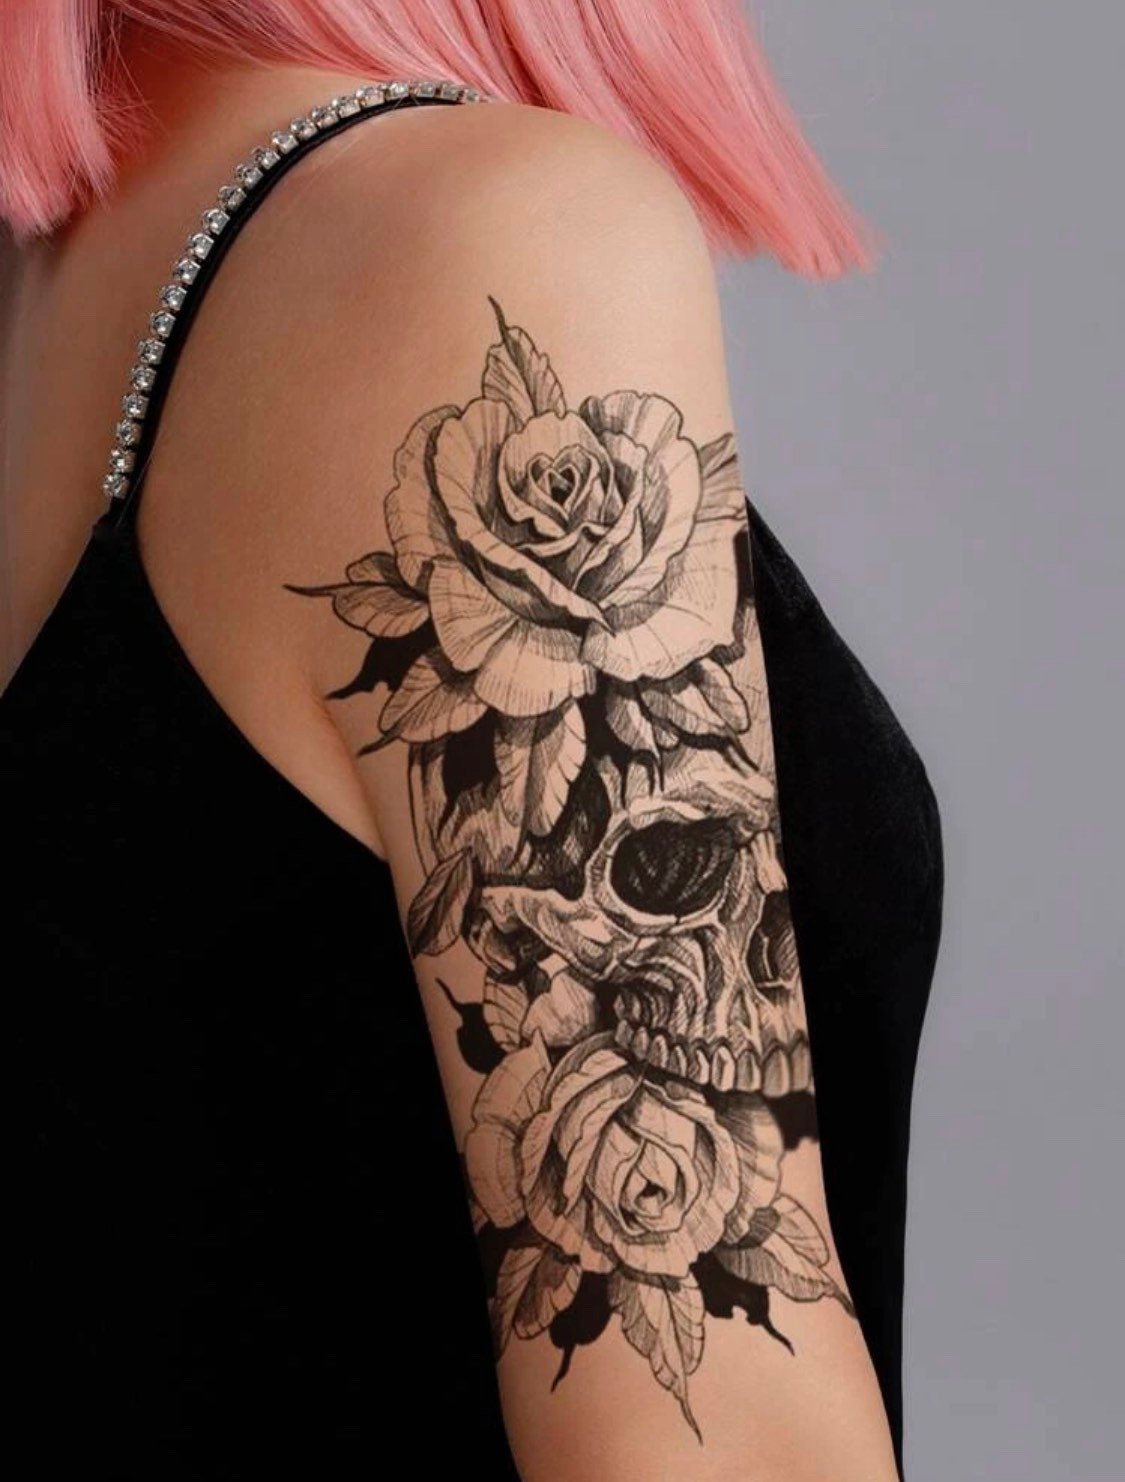 Really want a massive upper thigh tattoo for my birthday I love gothic  horror style stuff Im thinking black roses with some gothic lacejewl  type of decoration or even something celtic design